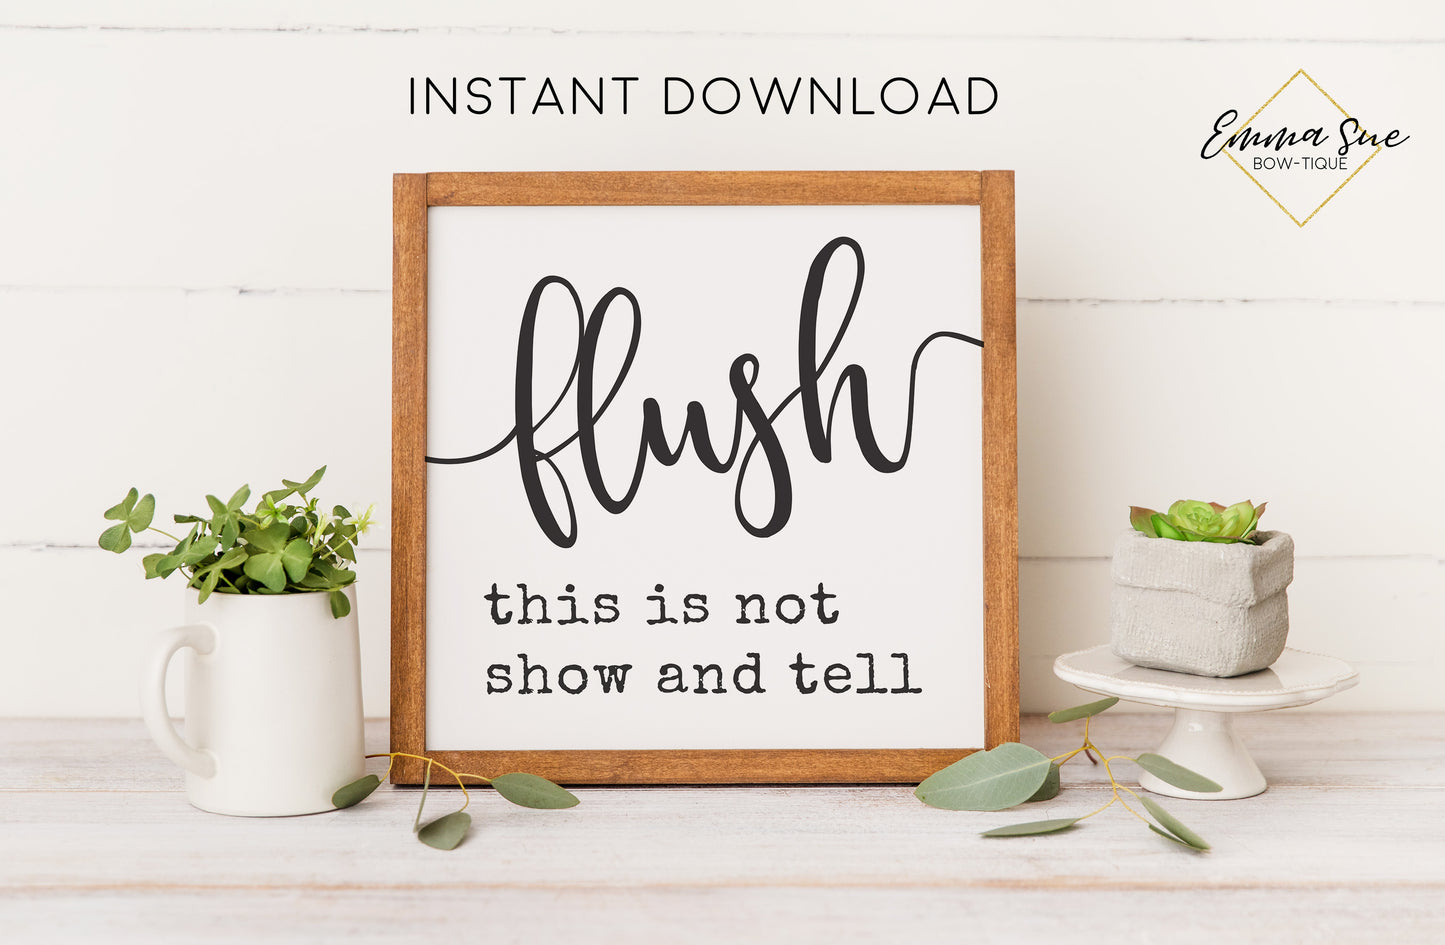 Kid's bathroom Flush this is not show and tell Sign - Farmhouse Bathroom Art Digital Printable Instant Download